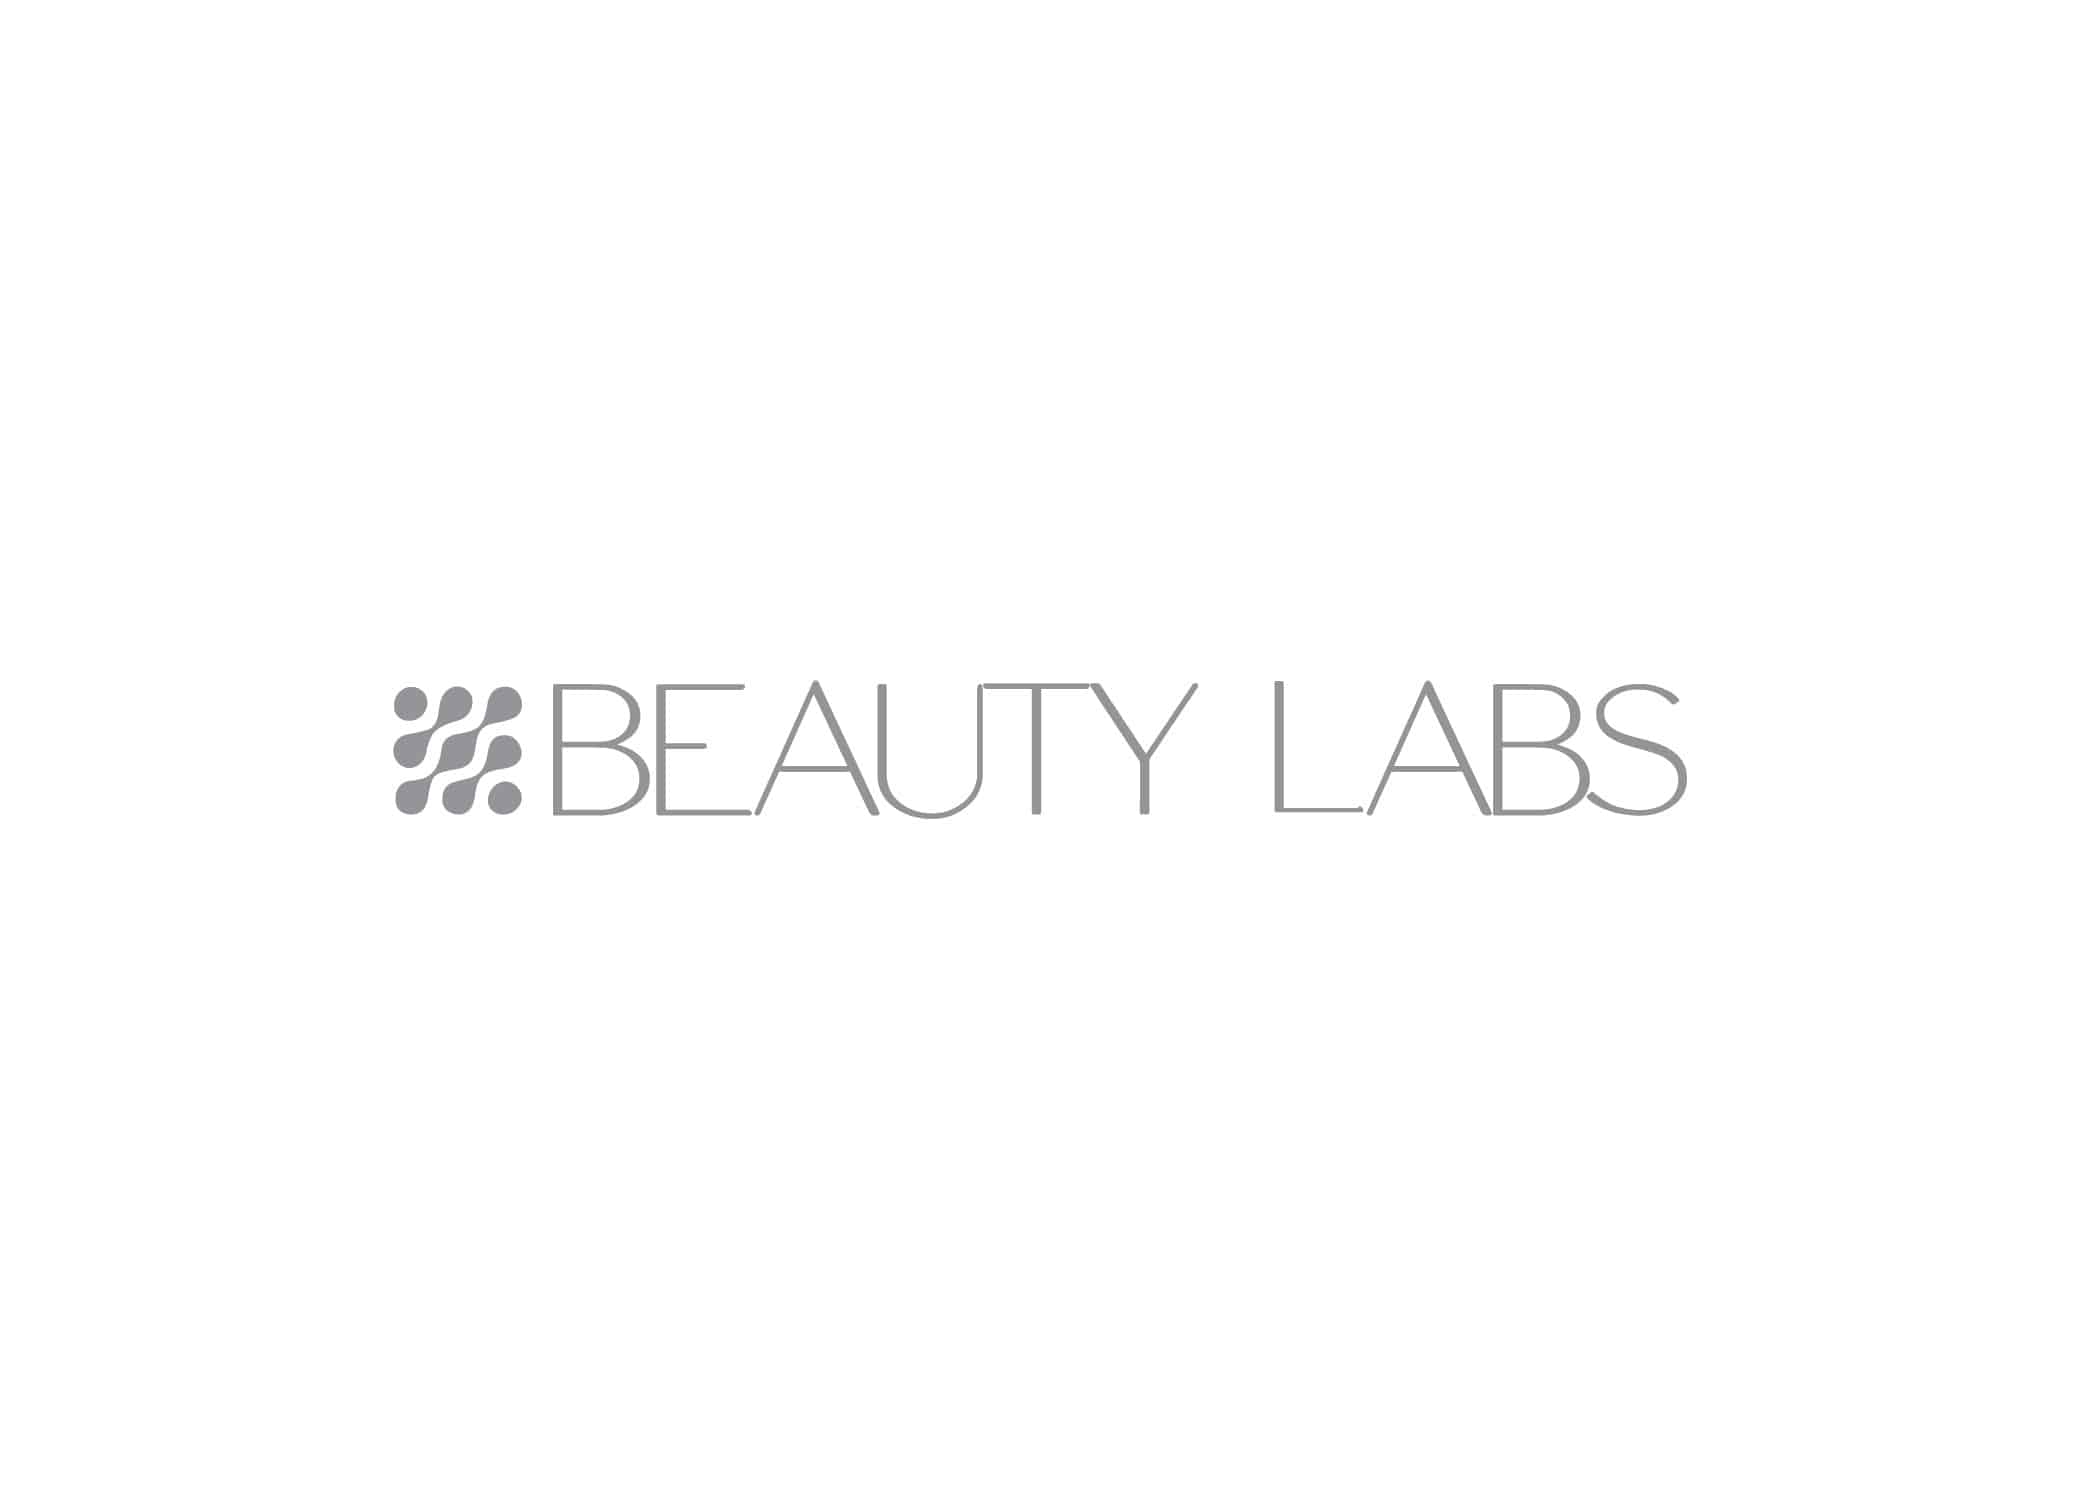 Beauty Labs logo design with high-tech, grey font and hand-drawn geometric molecule structure icon.